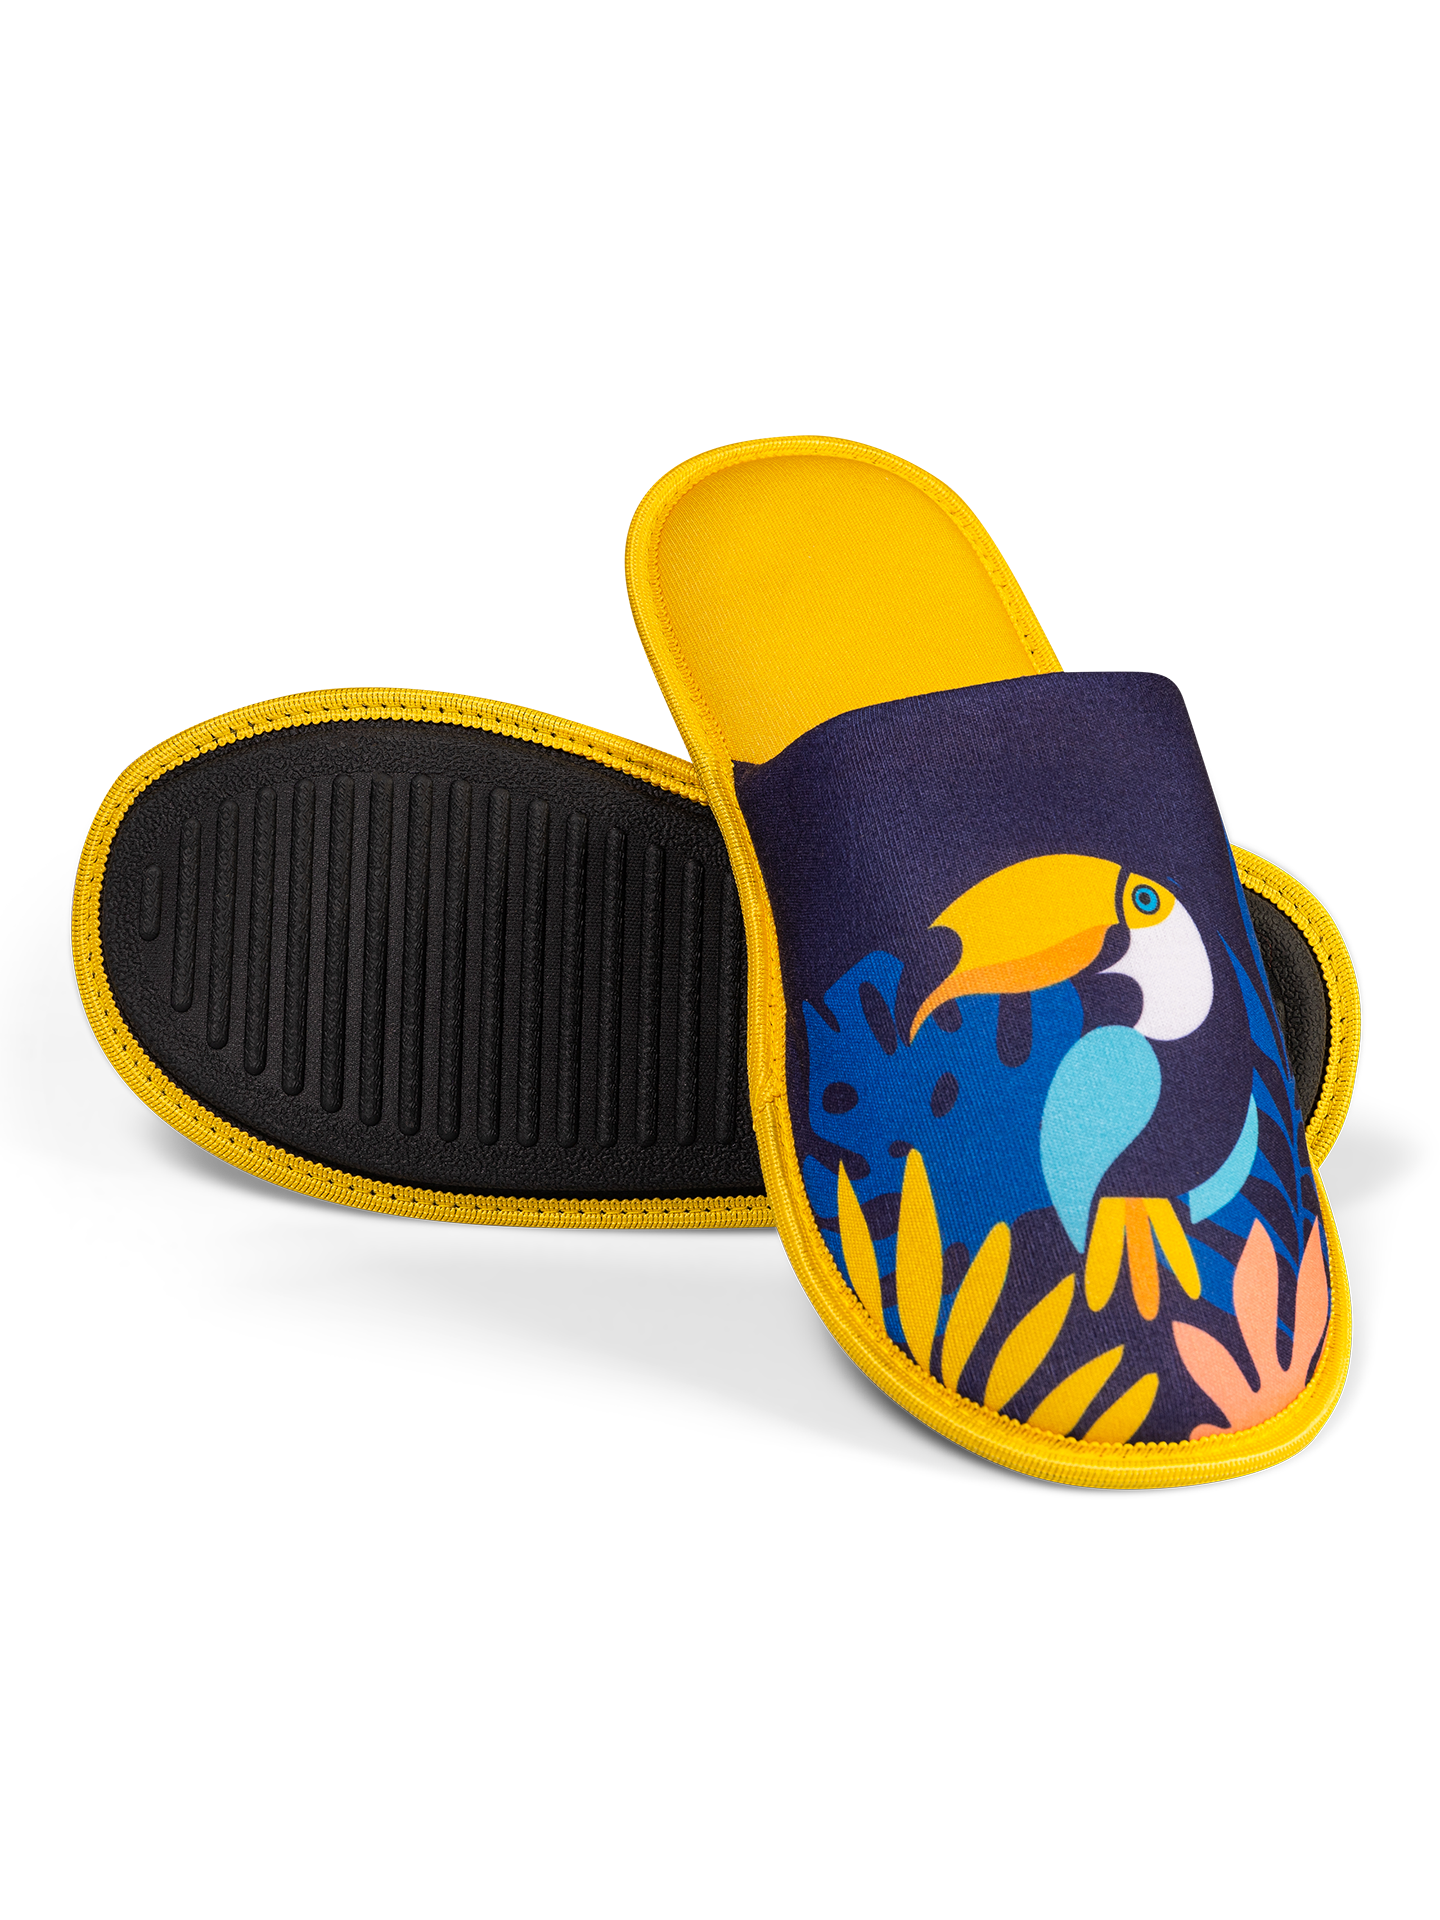 Slippers Tropical Toucan